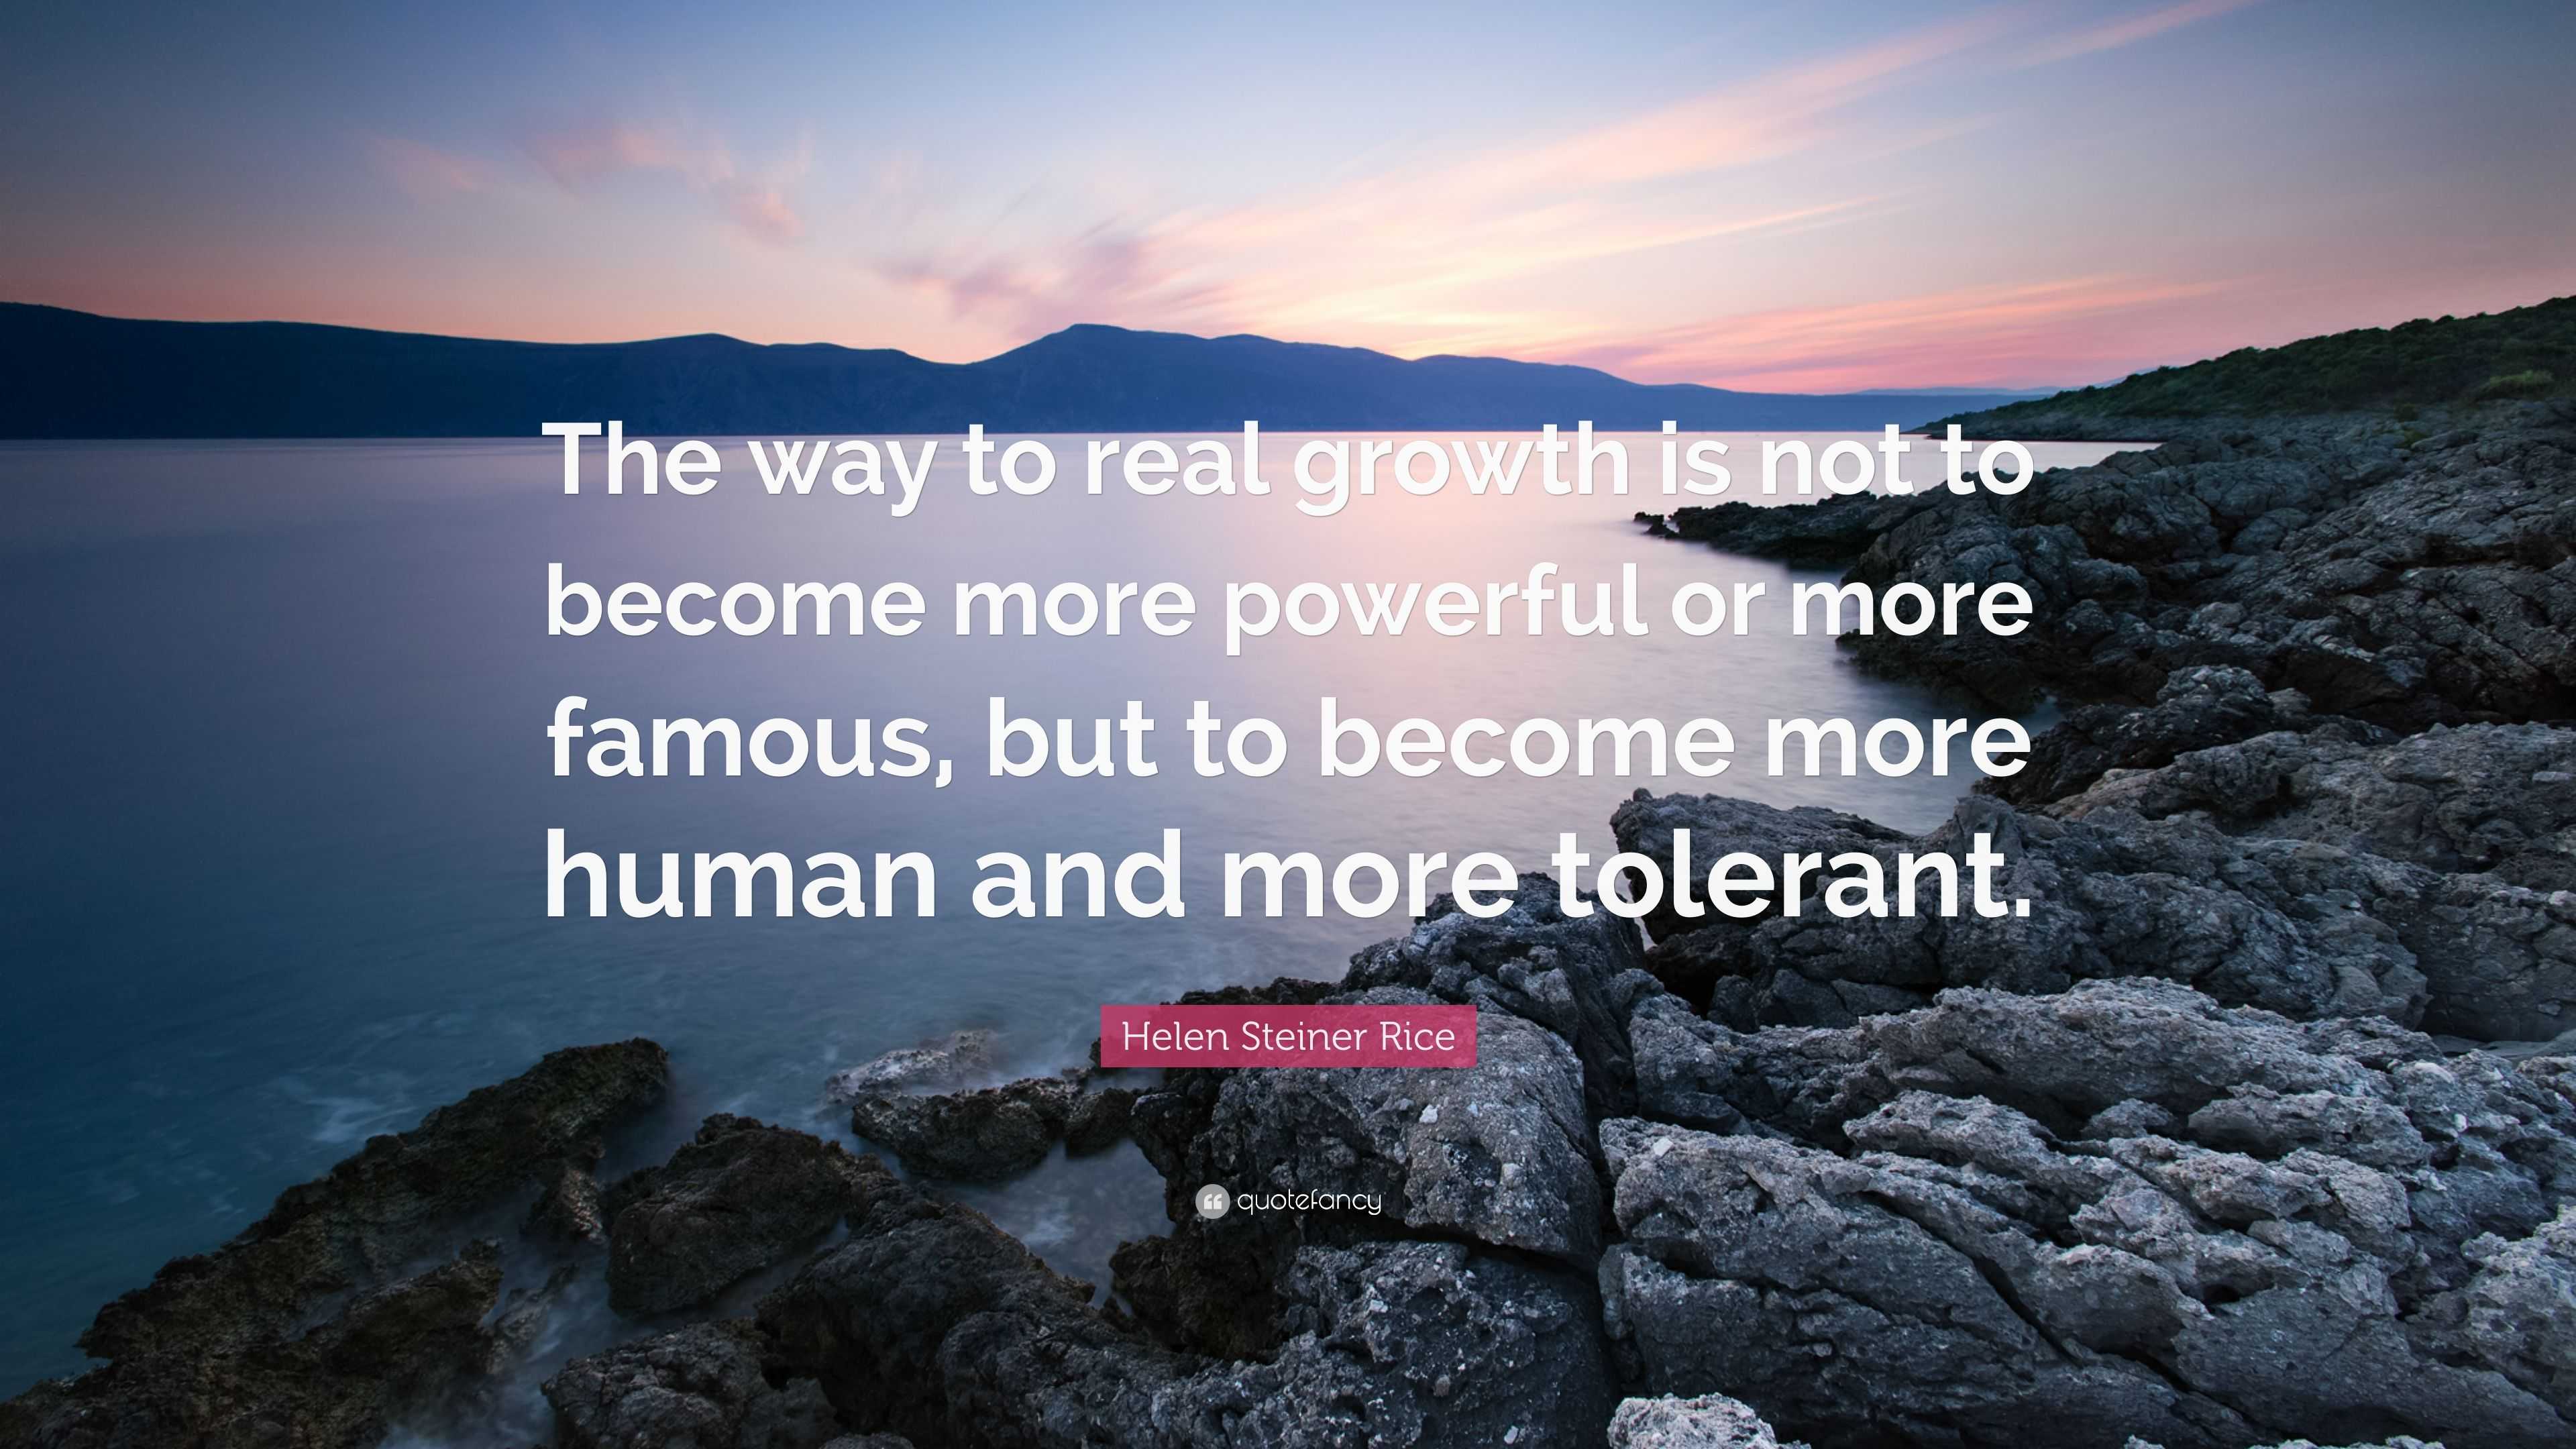 Helen Steiner Rice Quote: "The way to real growth is not to become more powerful or more famous ...